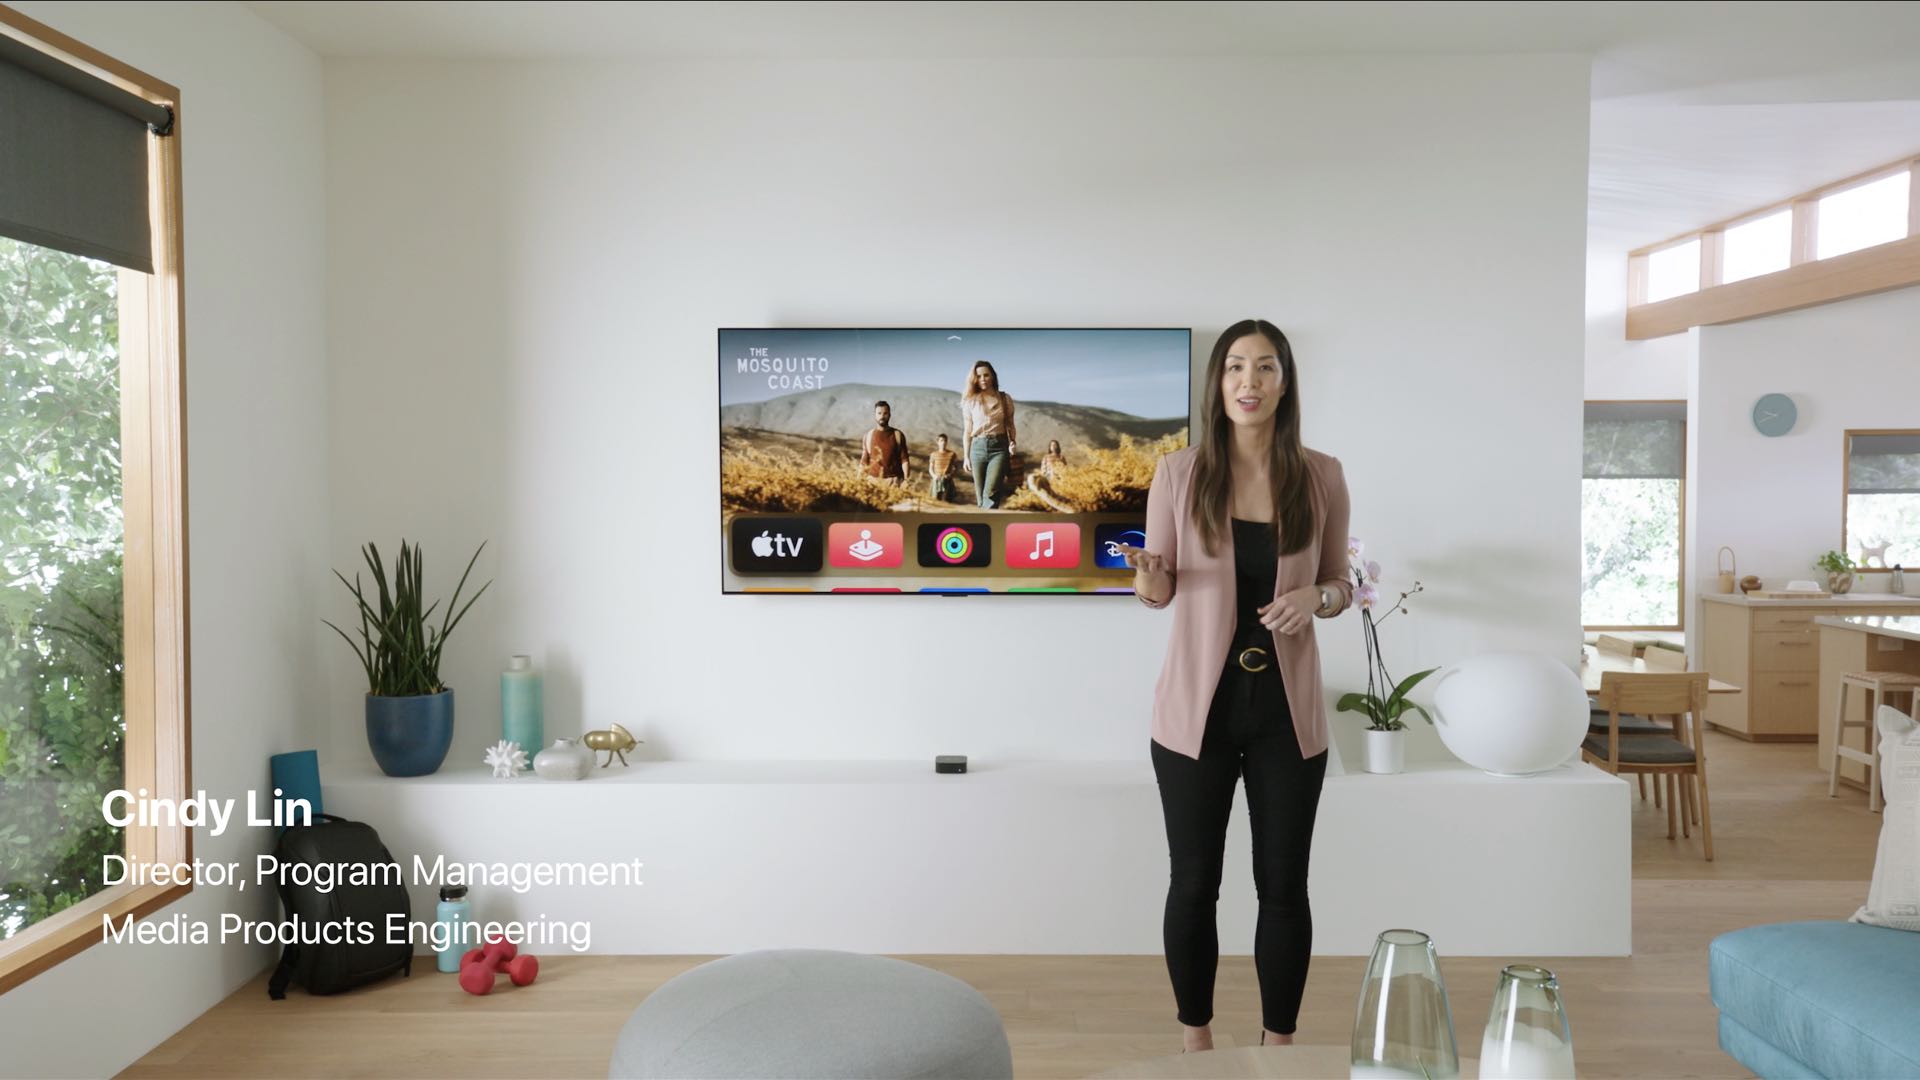 A still image from the April 2021 Apple event video in which executive Cindy Lin discusses the Apple TV 4K while standing in front of a TV in a living room set